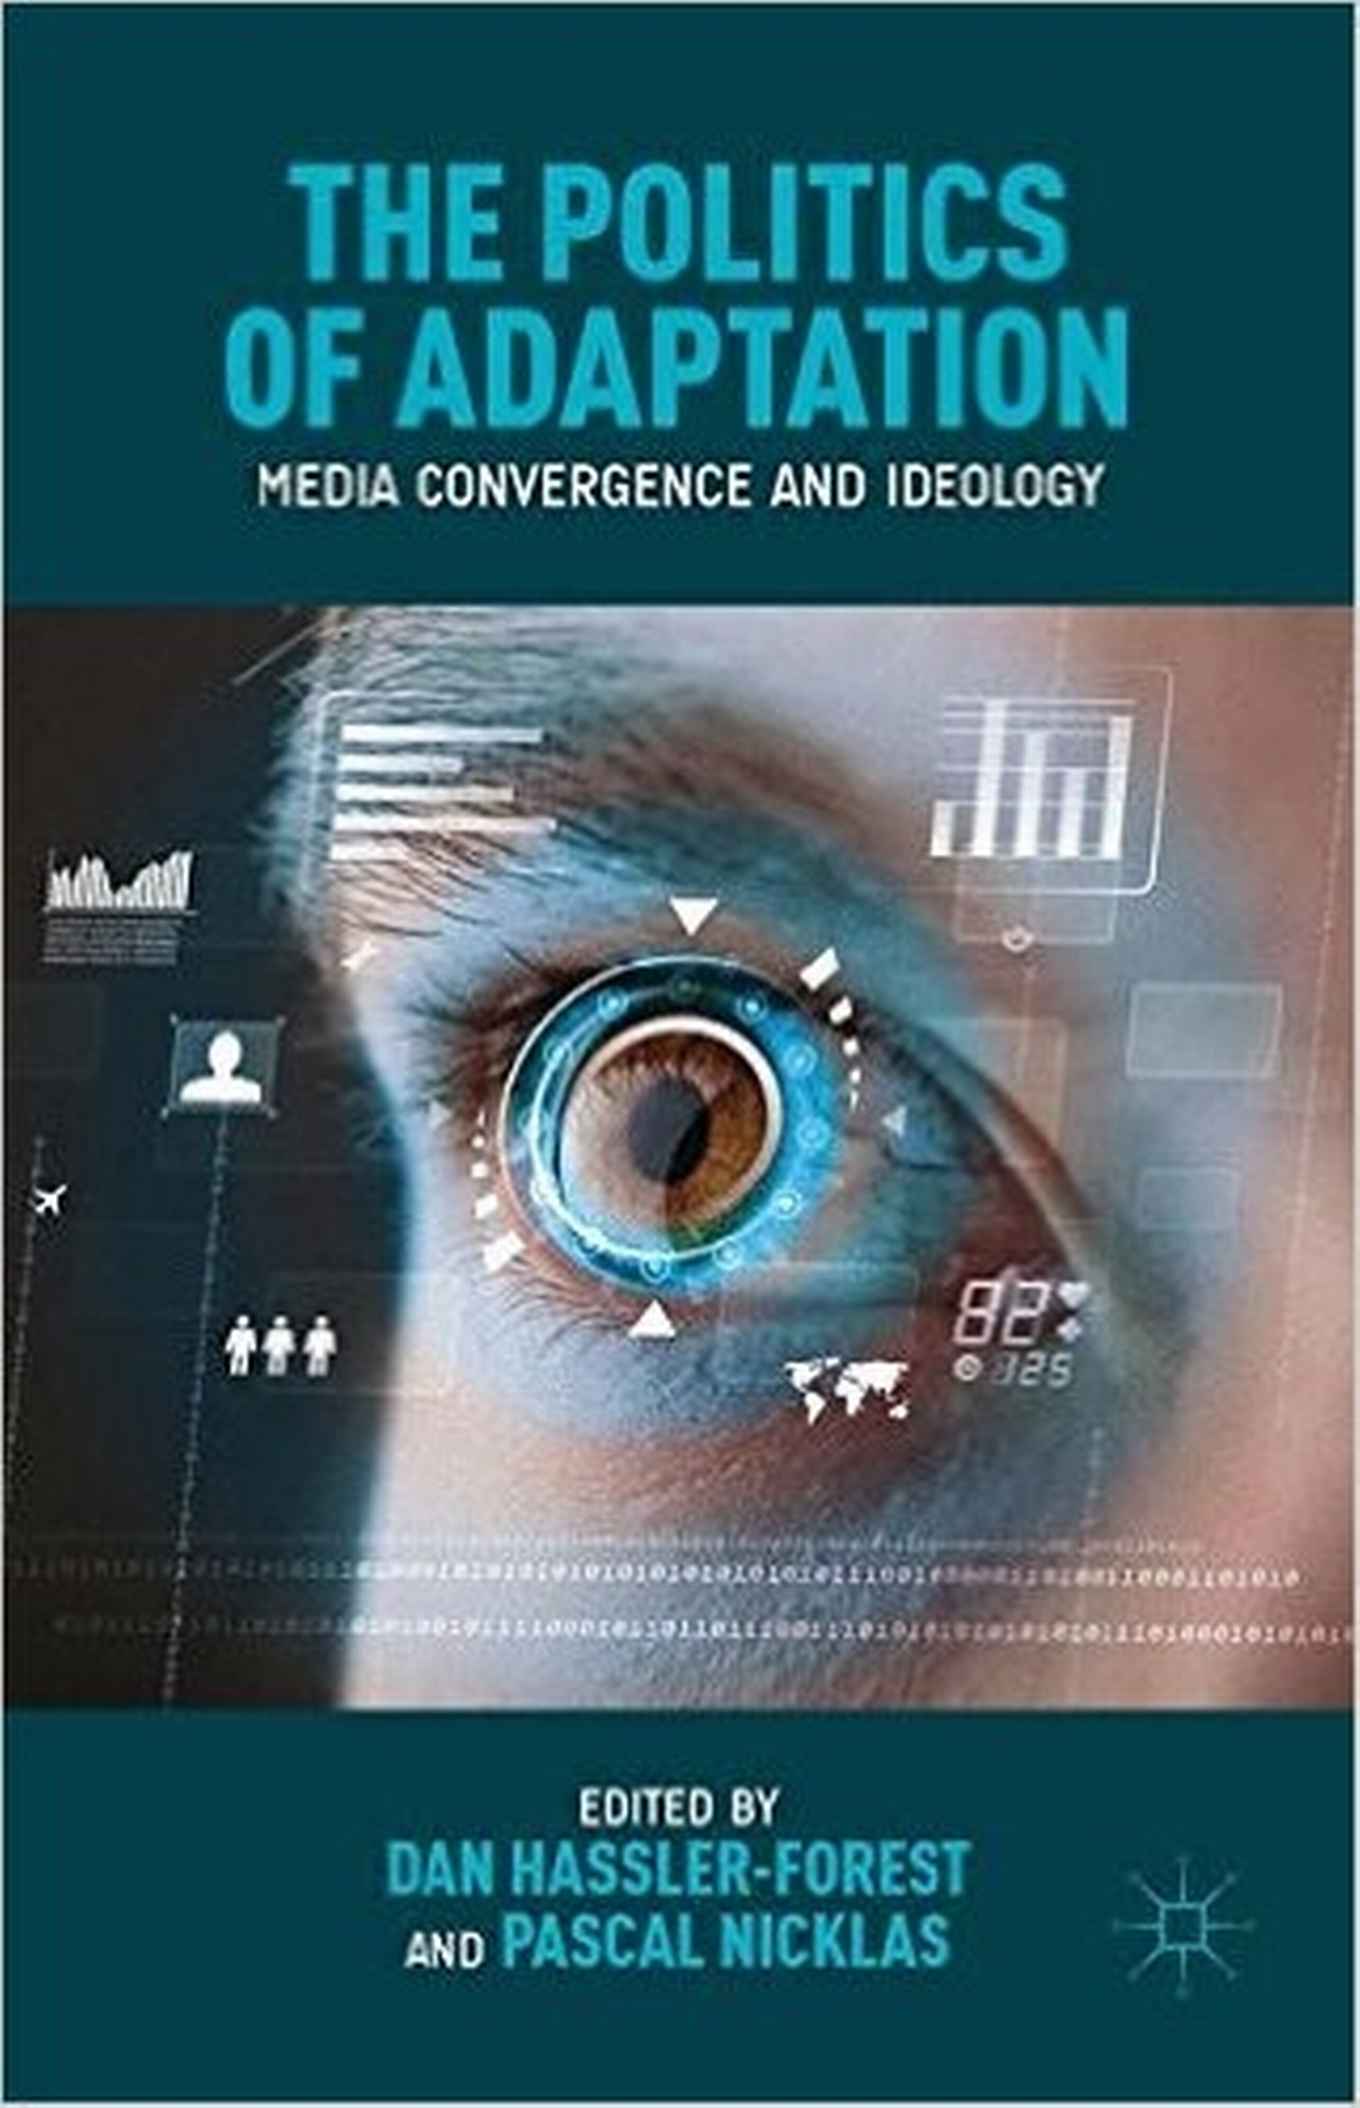 The Politics of Adaptation: Media Convergence and Ideology - Dan Hassler-Forest and Pascal Nicklas - Palgrave Macmillan UK